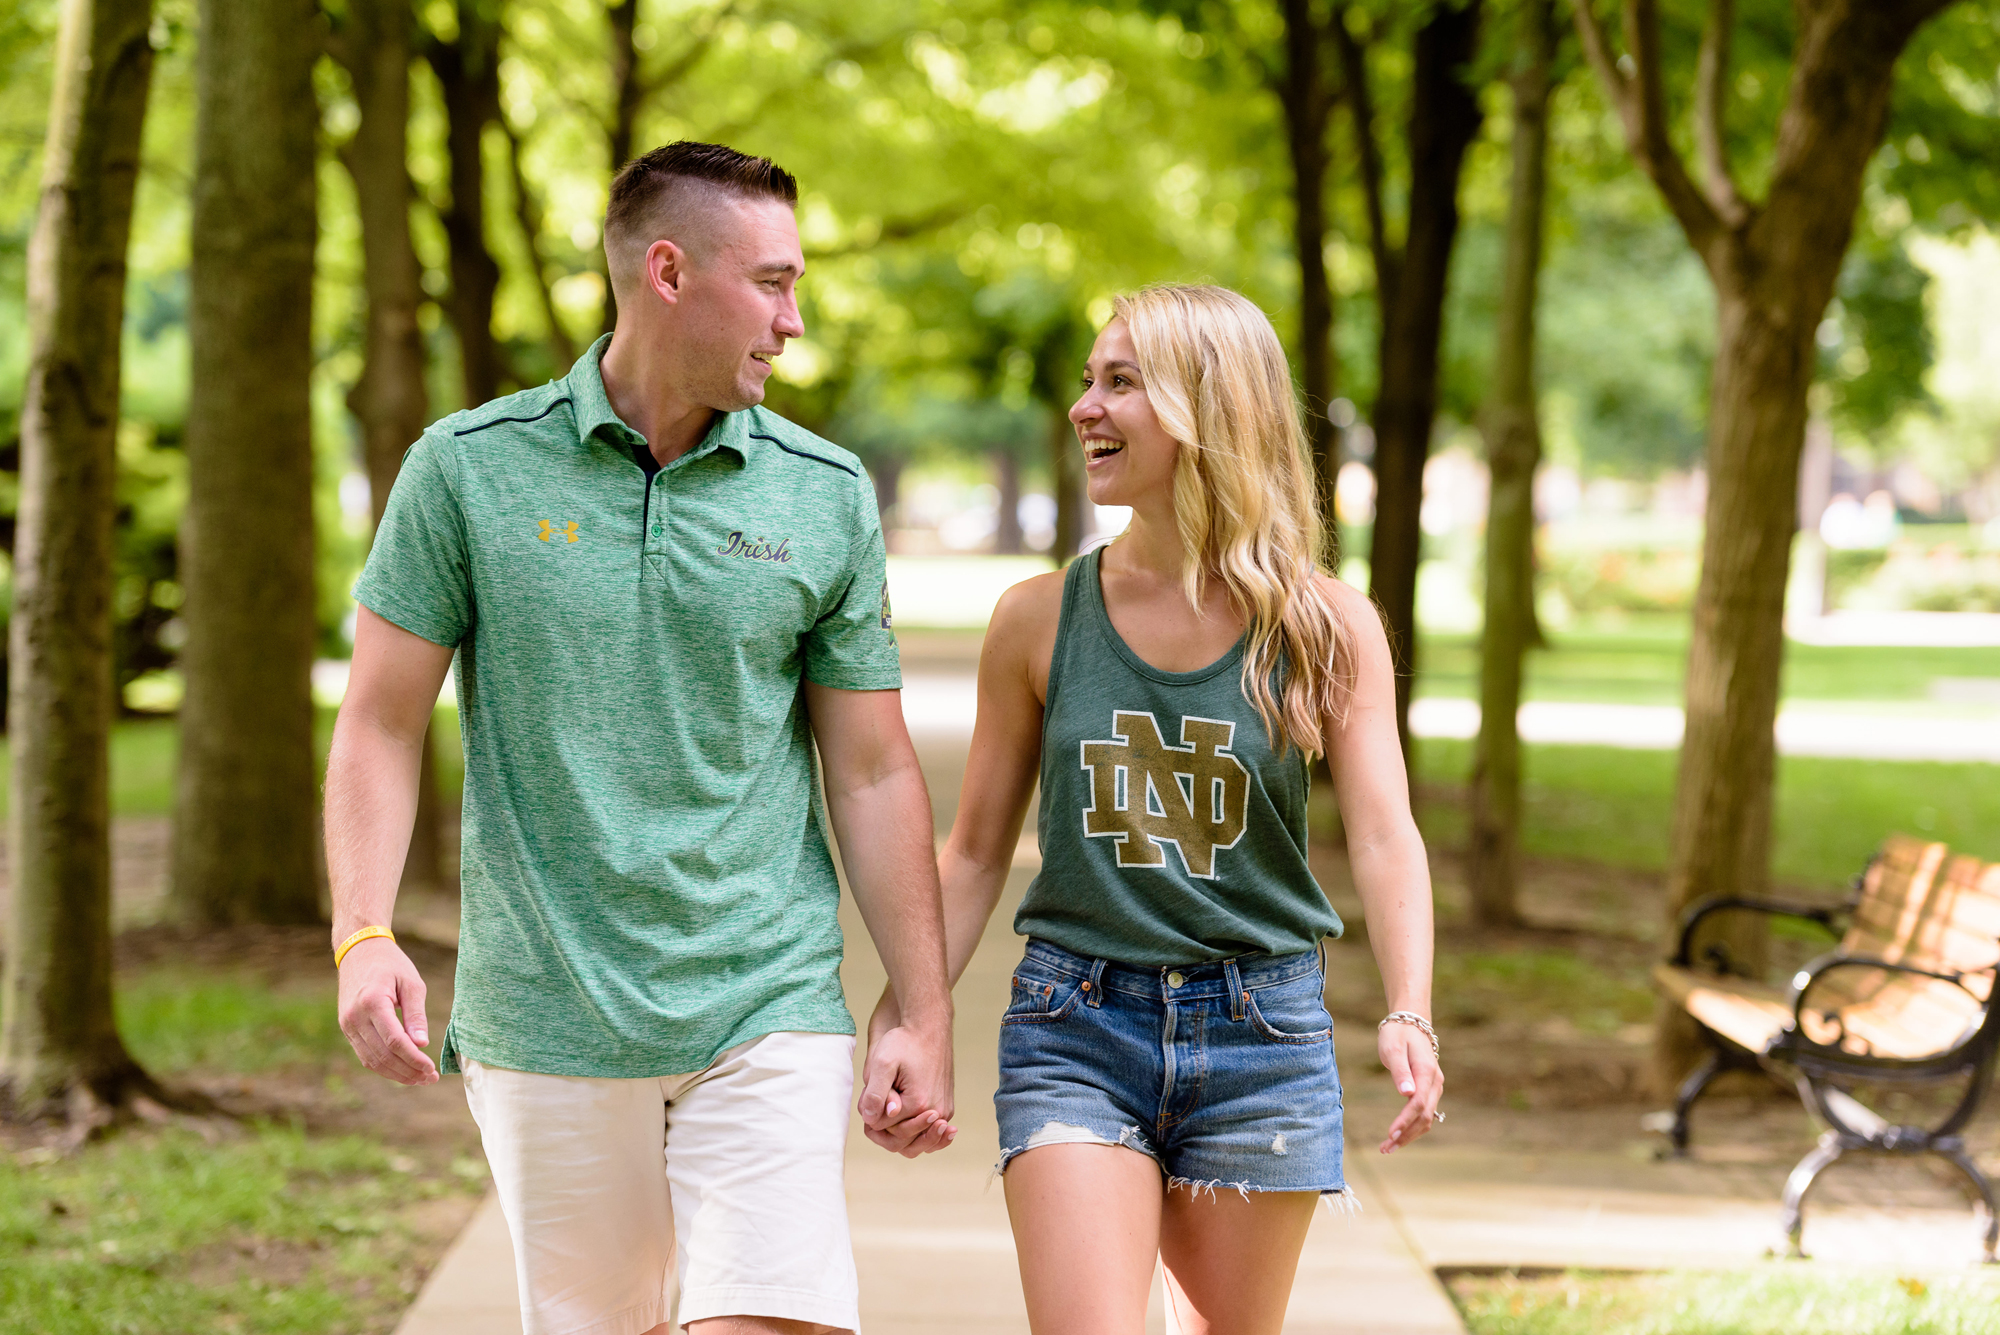 Newly engaged couple posed for photos down the row of trees on God Quad after he proposed on the campus of University of Notre Dame